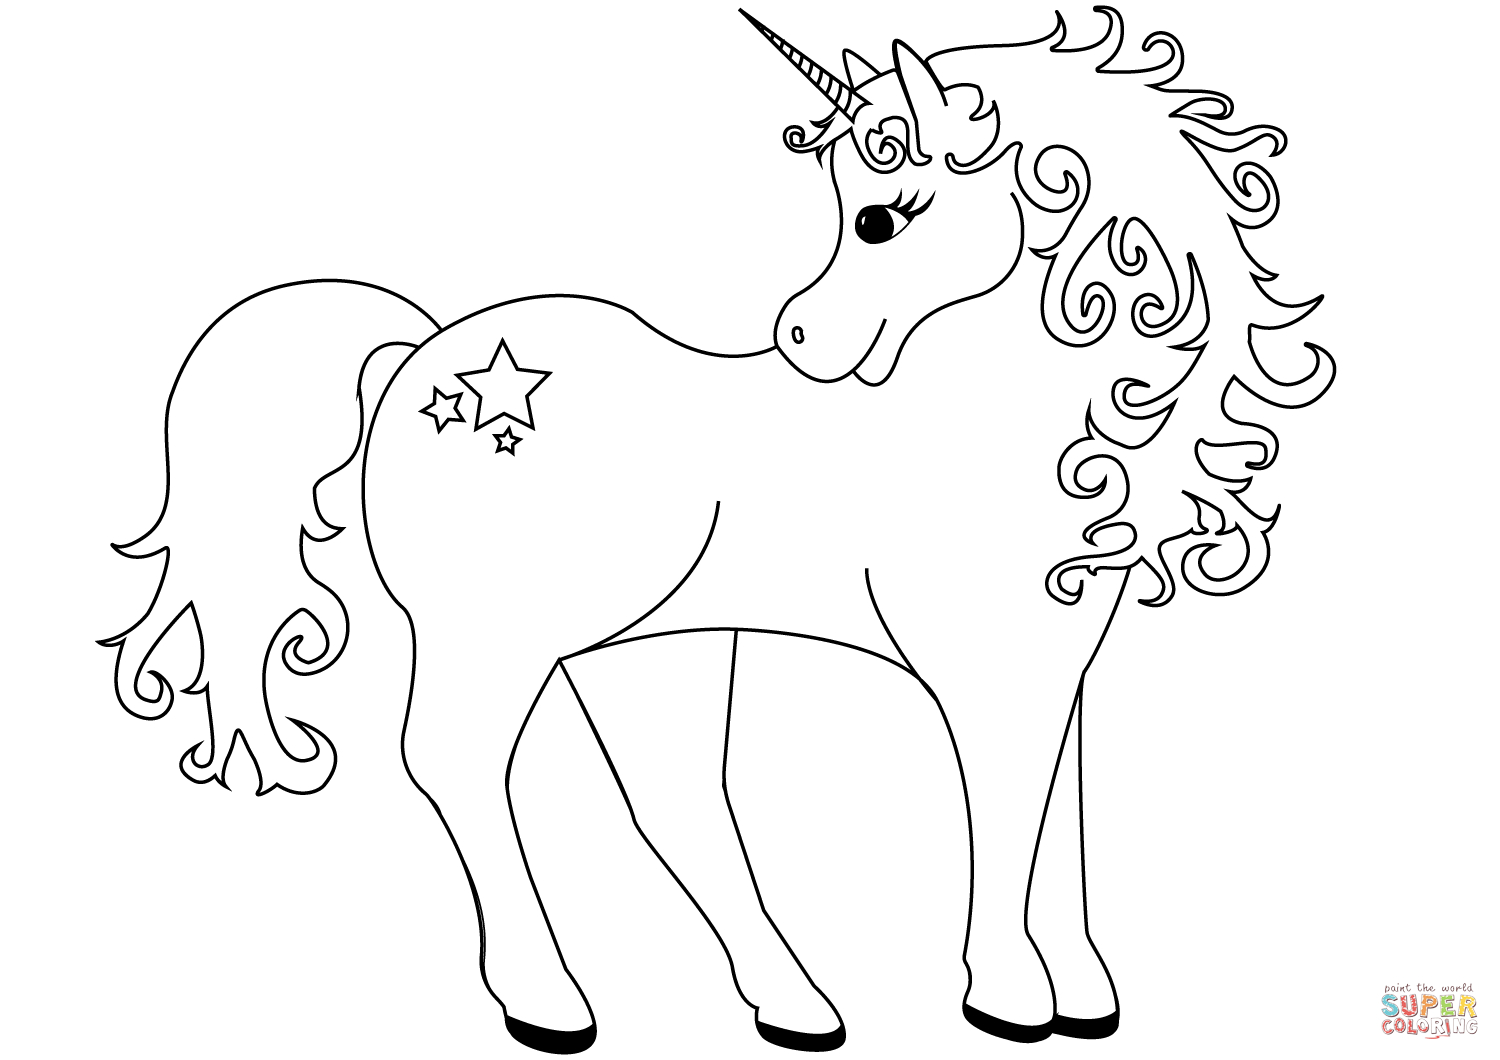 Lovely Unicorn Coloring Page | Free Printable Coloring Pages - Free Printable Unicorn Coloring Pages